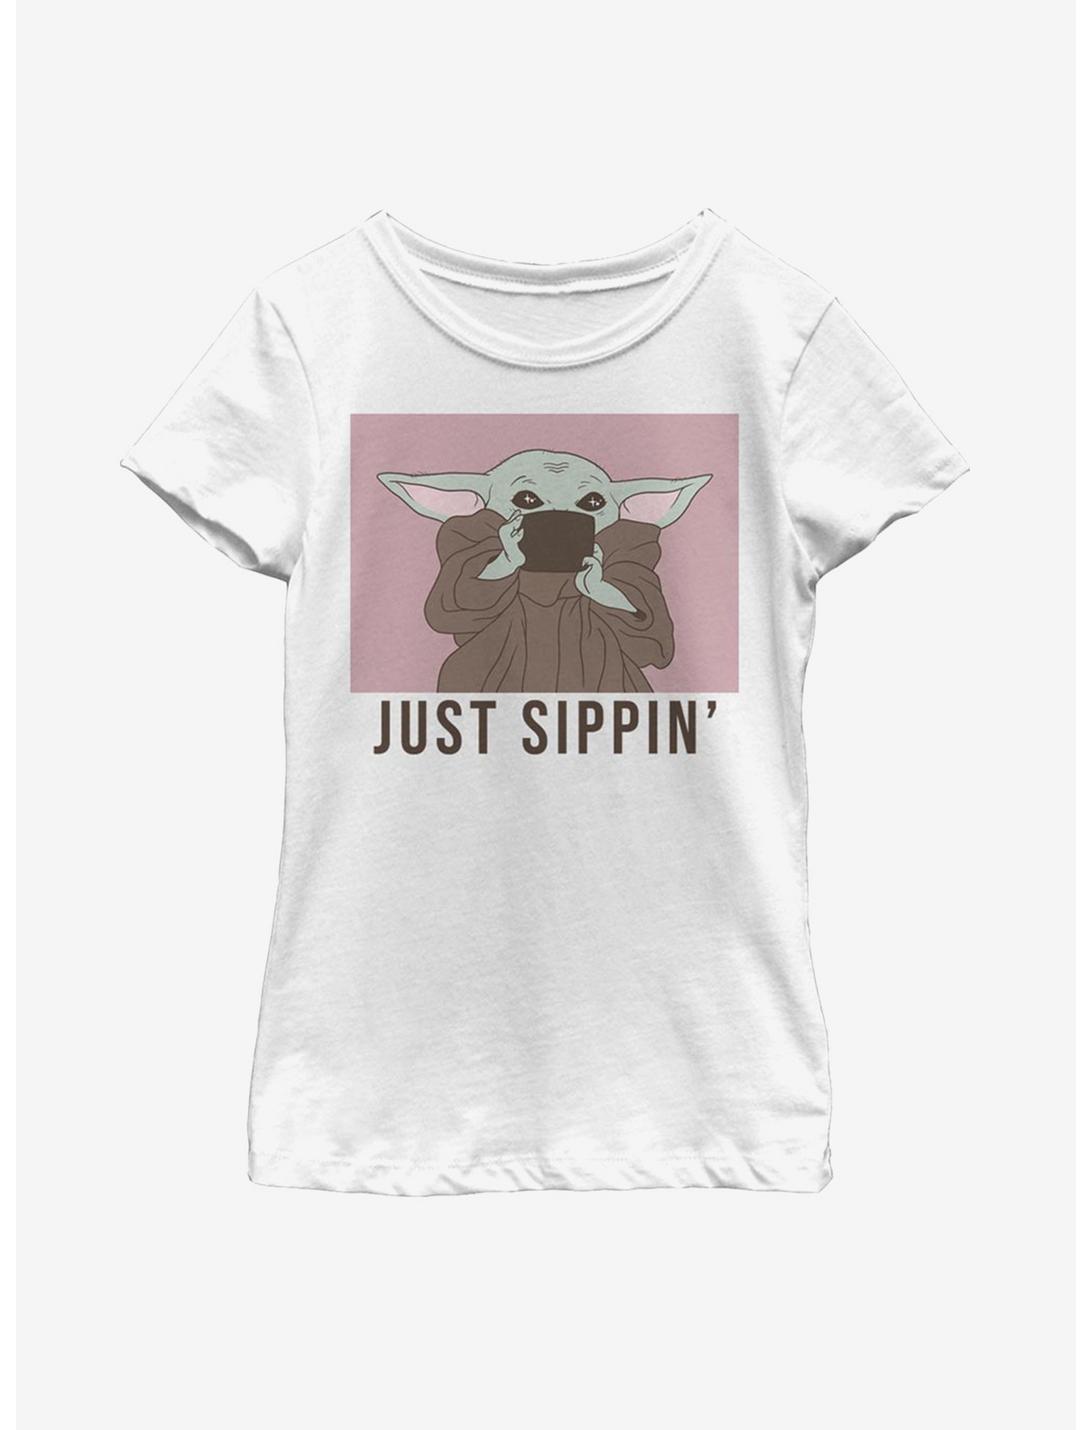 Star Wars The Mandalorian The Child Just Sippin' Youth Girls T-Shirt, WHITE, hi-res